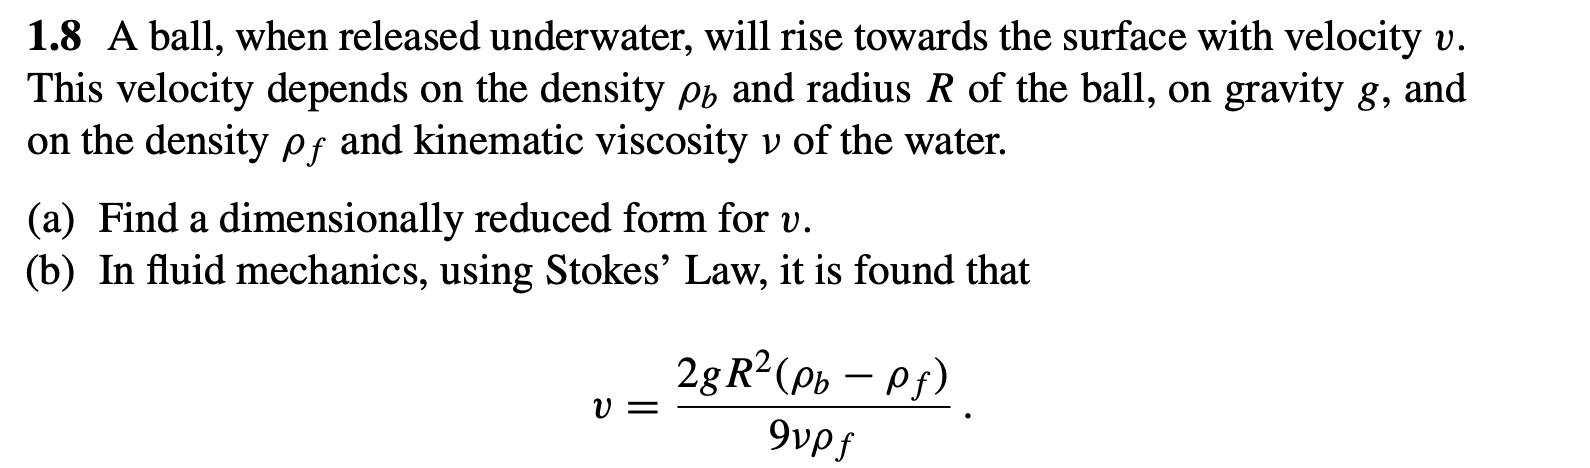 1.8 A ball, when released underwater, will rise towards the surface with velocity v. This velocity depends on